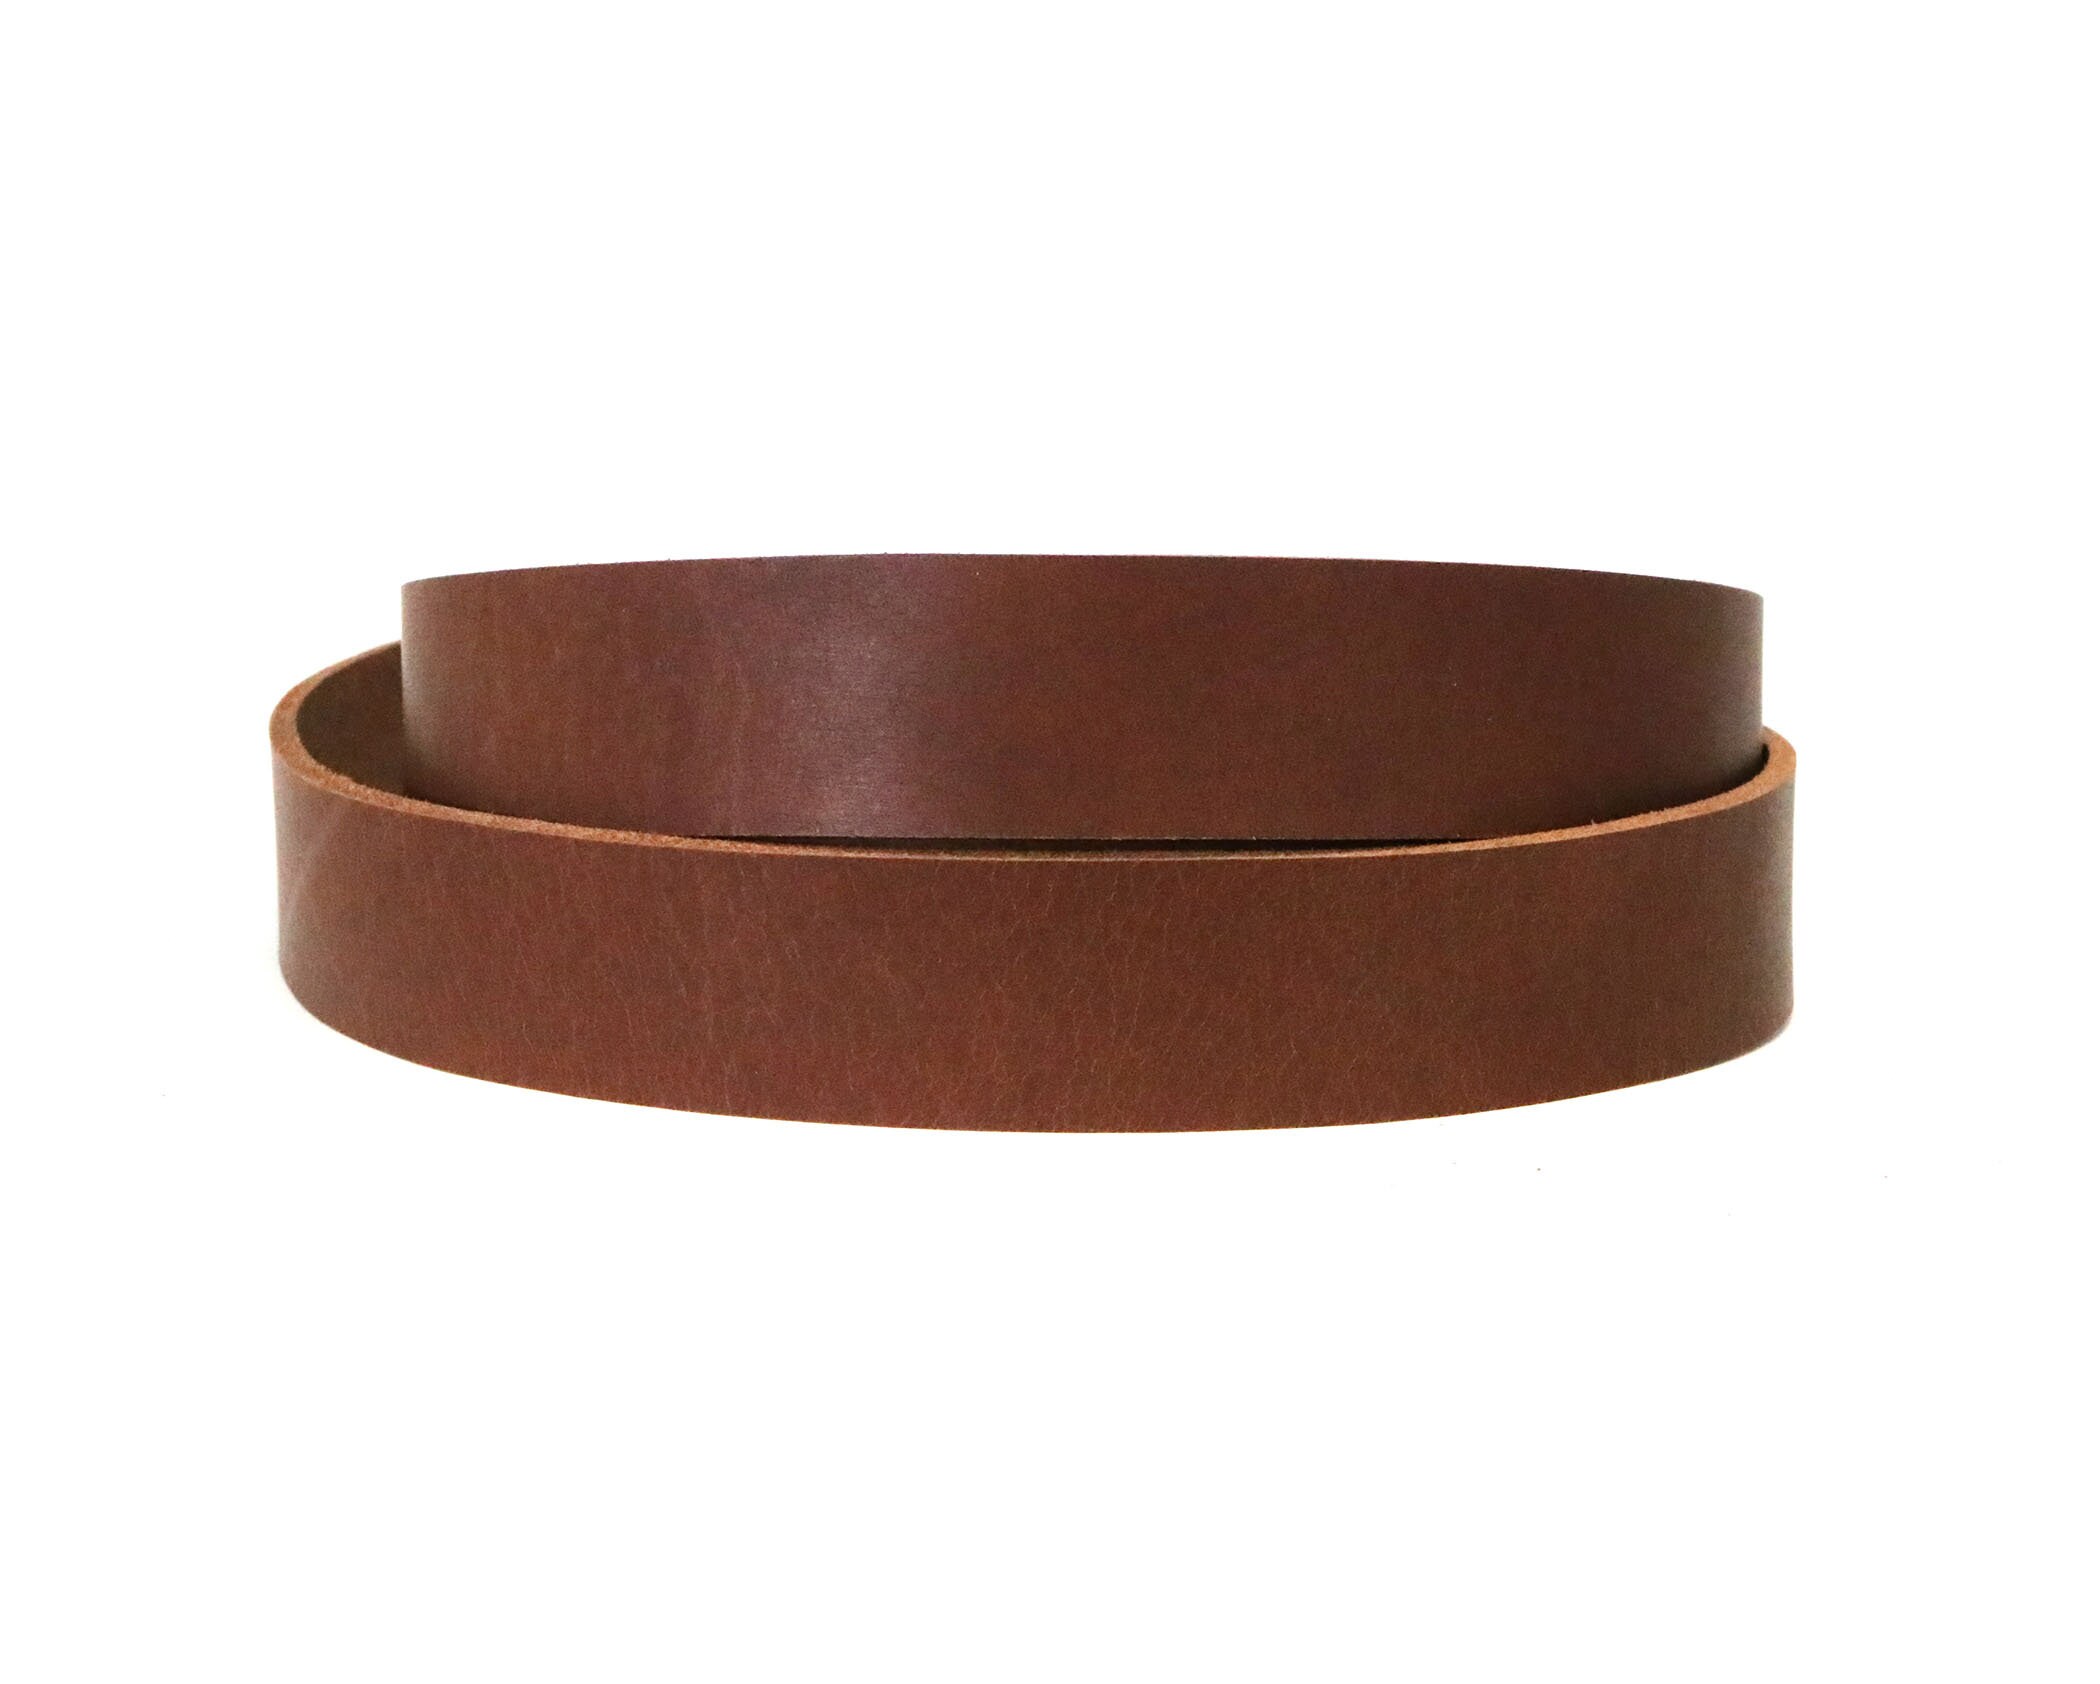 Genuine Leather Straps for Leather Crafts - 2 Rolls of 1x 42 and a 36”  Leather Cord - Full Grain Brown Buffalo Leather Strips for Belts, Cricut